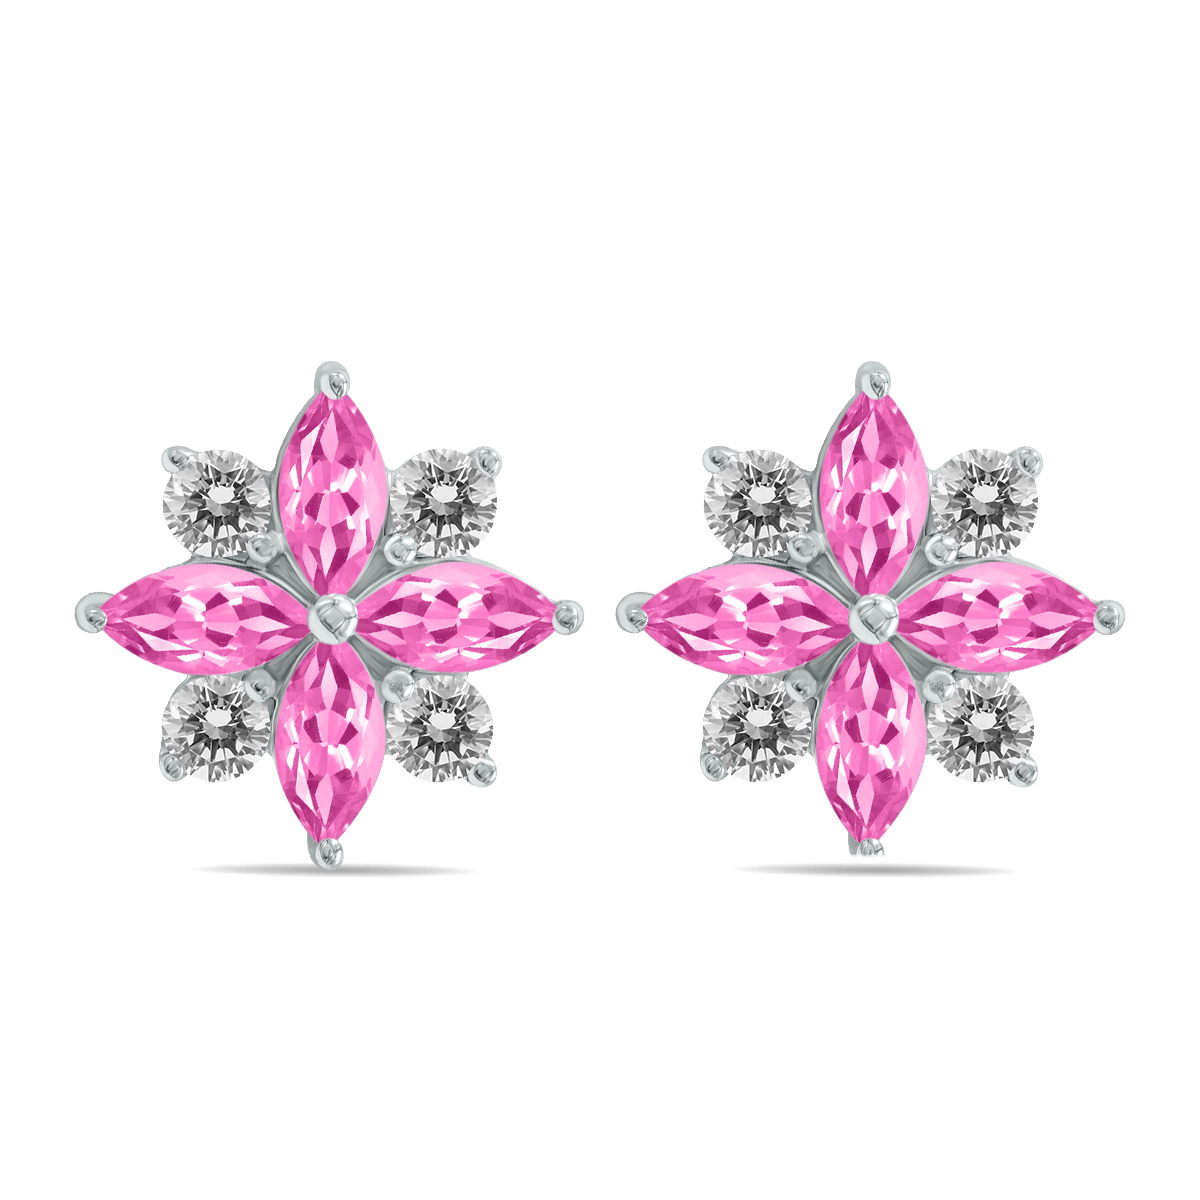 Image of 1 Carat TW Pink Topaz and Diamond Flower Earrings in 10K White Gold